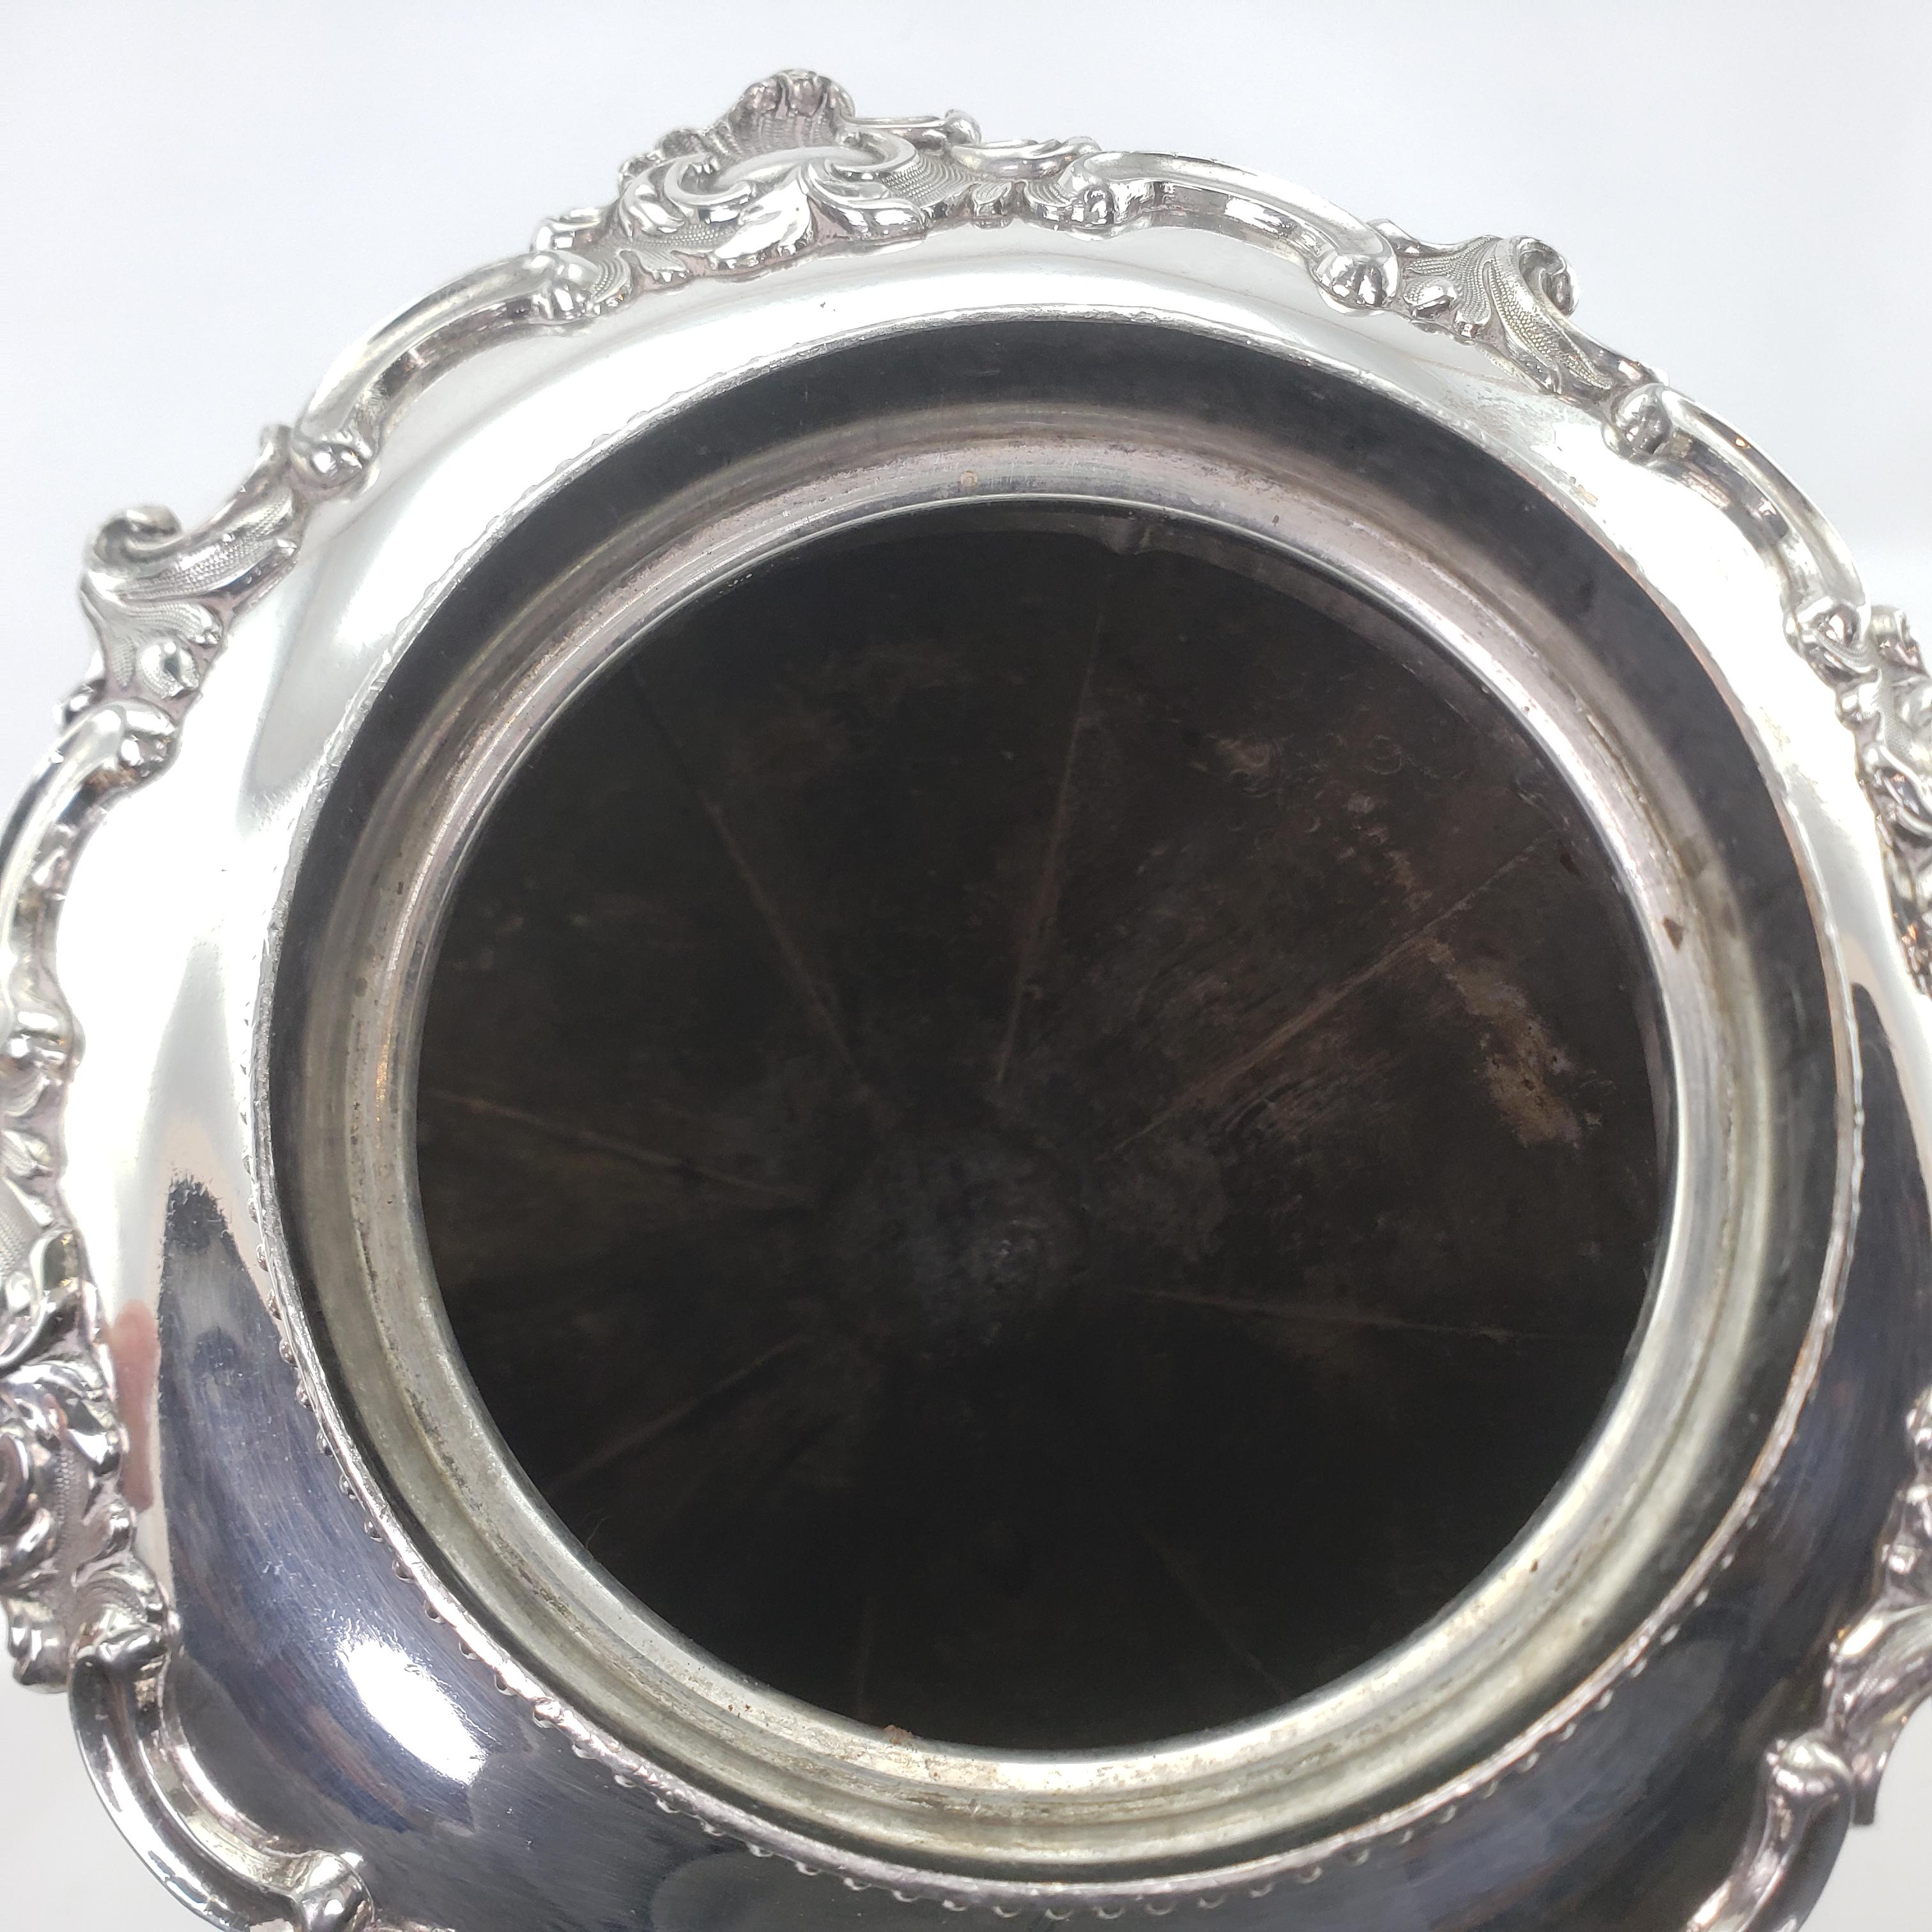 Antique Early Victorian Silver Plated Tea or Hot Water Urn with Floral Engraving For Sale 2